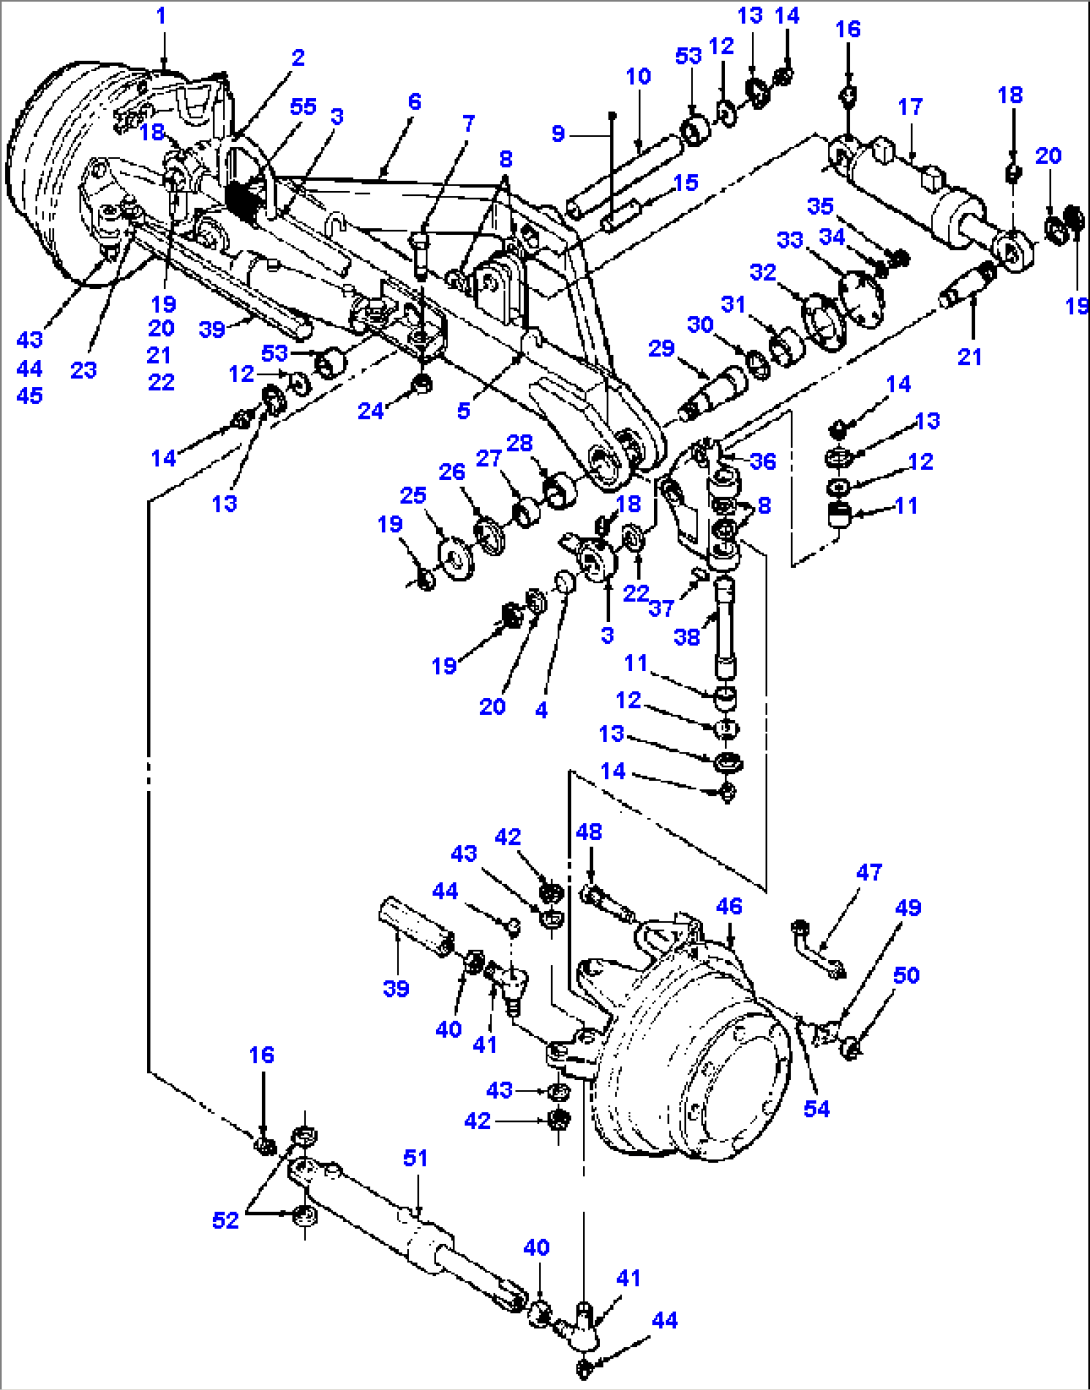 FIG. S5230-01A3 AWD FRONT AXLE - WITHOUT FRONT FENDERS